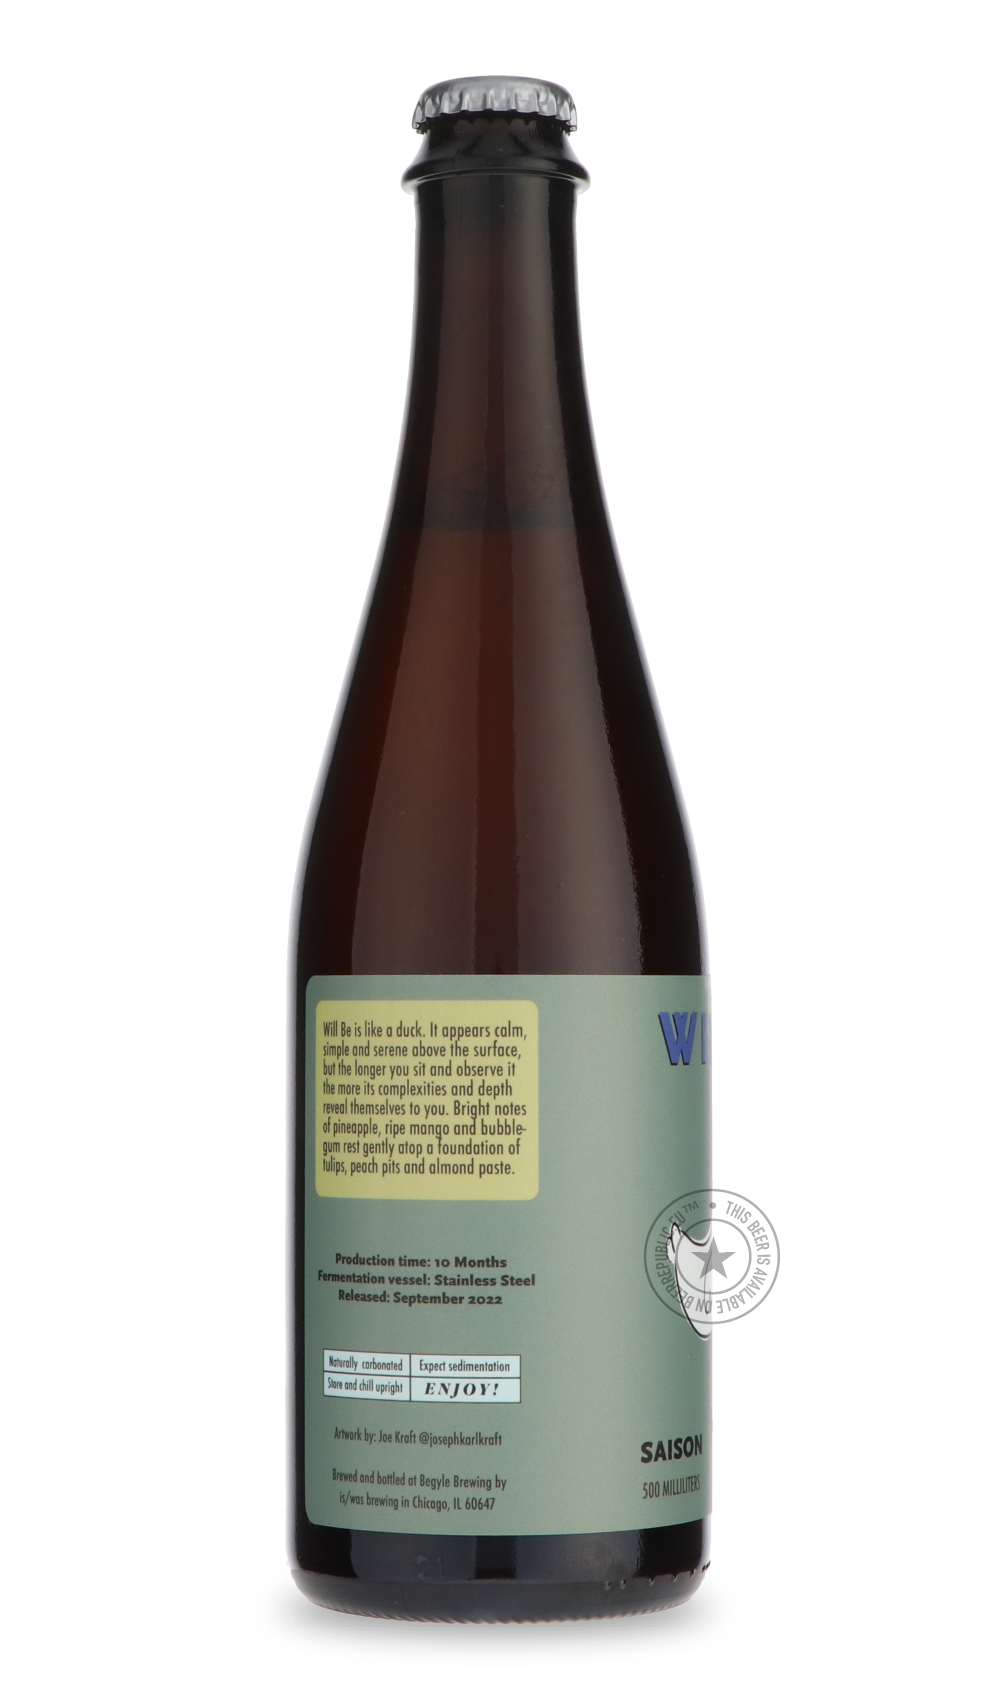 -is/was- Will Be bottle conditioned with Brettanomyces-Sour / Wild & Fruity- Only @ Beer Republic - The best online beer store for American & Canadian craft beer - Buy beer online from the USA and Canada - Bier online kopen - Amerikaans bier kopen - Craft beer store - Craft beer kopen - Amerikanisch bier kaufen - Bier online kaufen - Acheter biere online - IPA - Stout - Porter - New England IPA - Hazy IPA - Imperial Stout - Barrel Aged - Barrel Aged Imperial Stout - Brown - Dark beer - Blond - Blonde - Pils